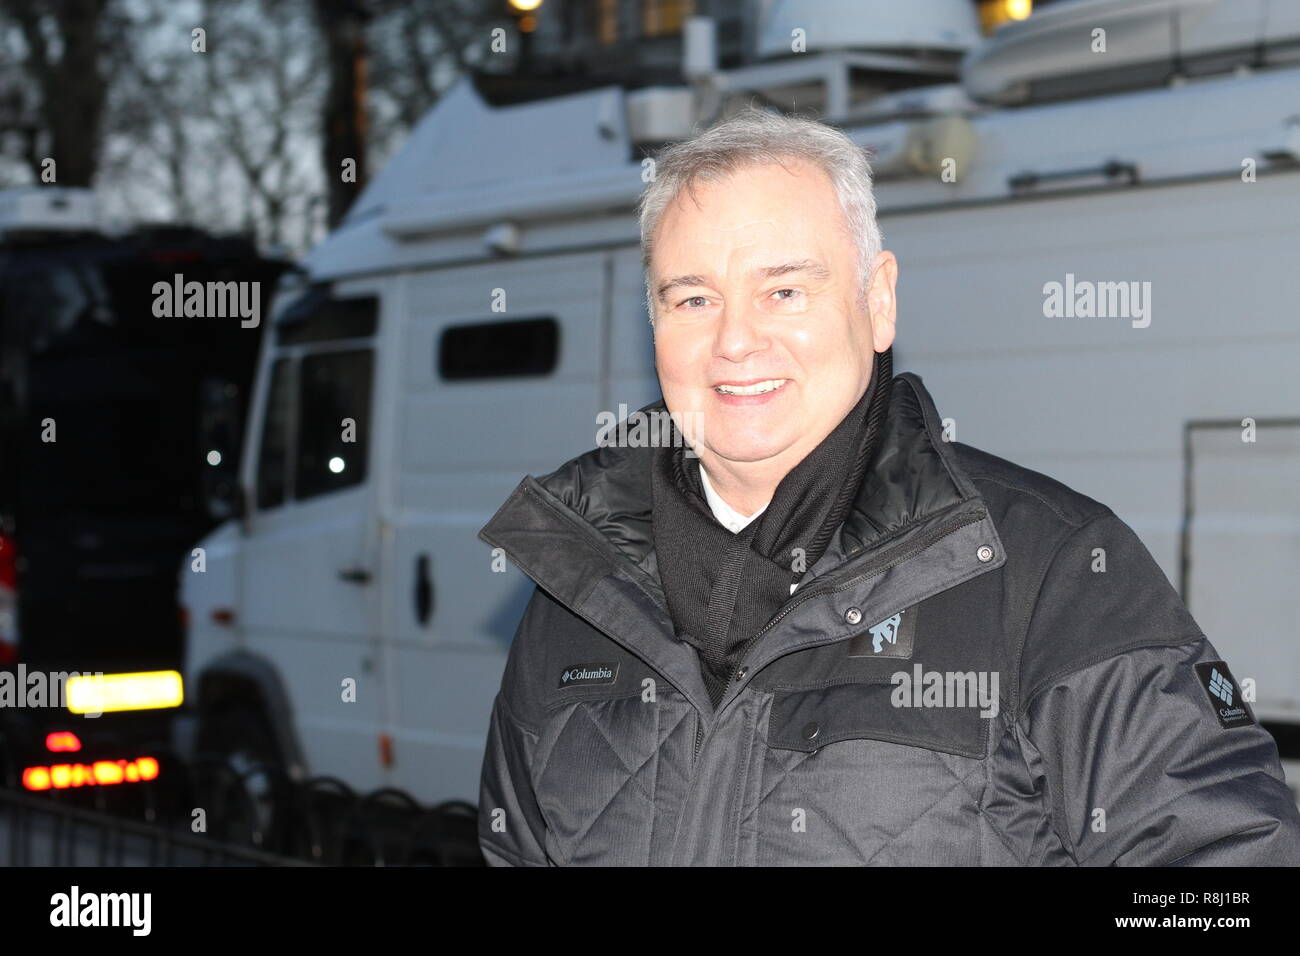 Eamonn Holmes in Westminster, Londra il 12 dicembre 2018. Russell Moore / Alamy. Foto Stock